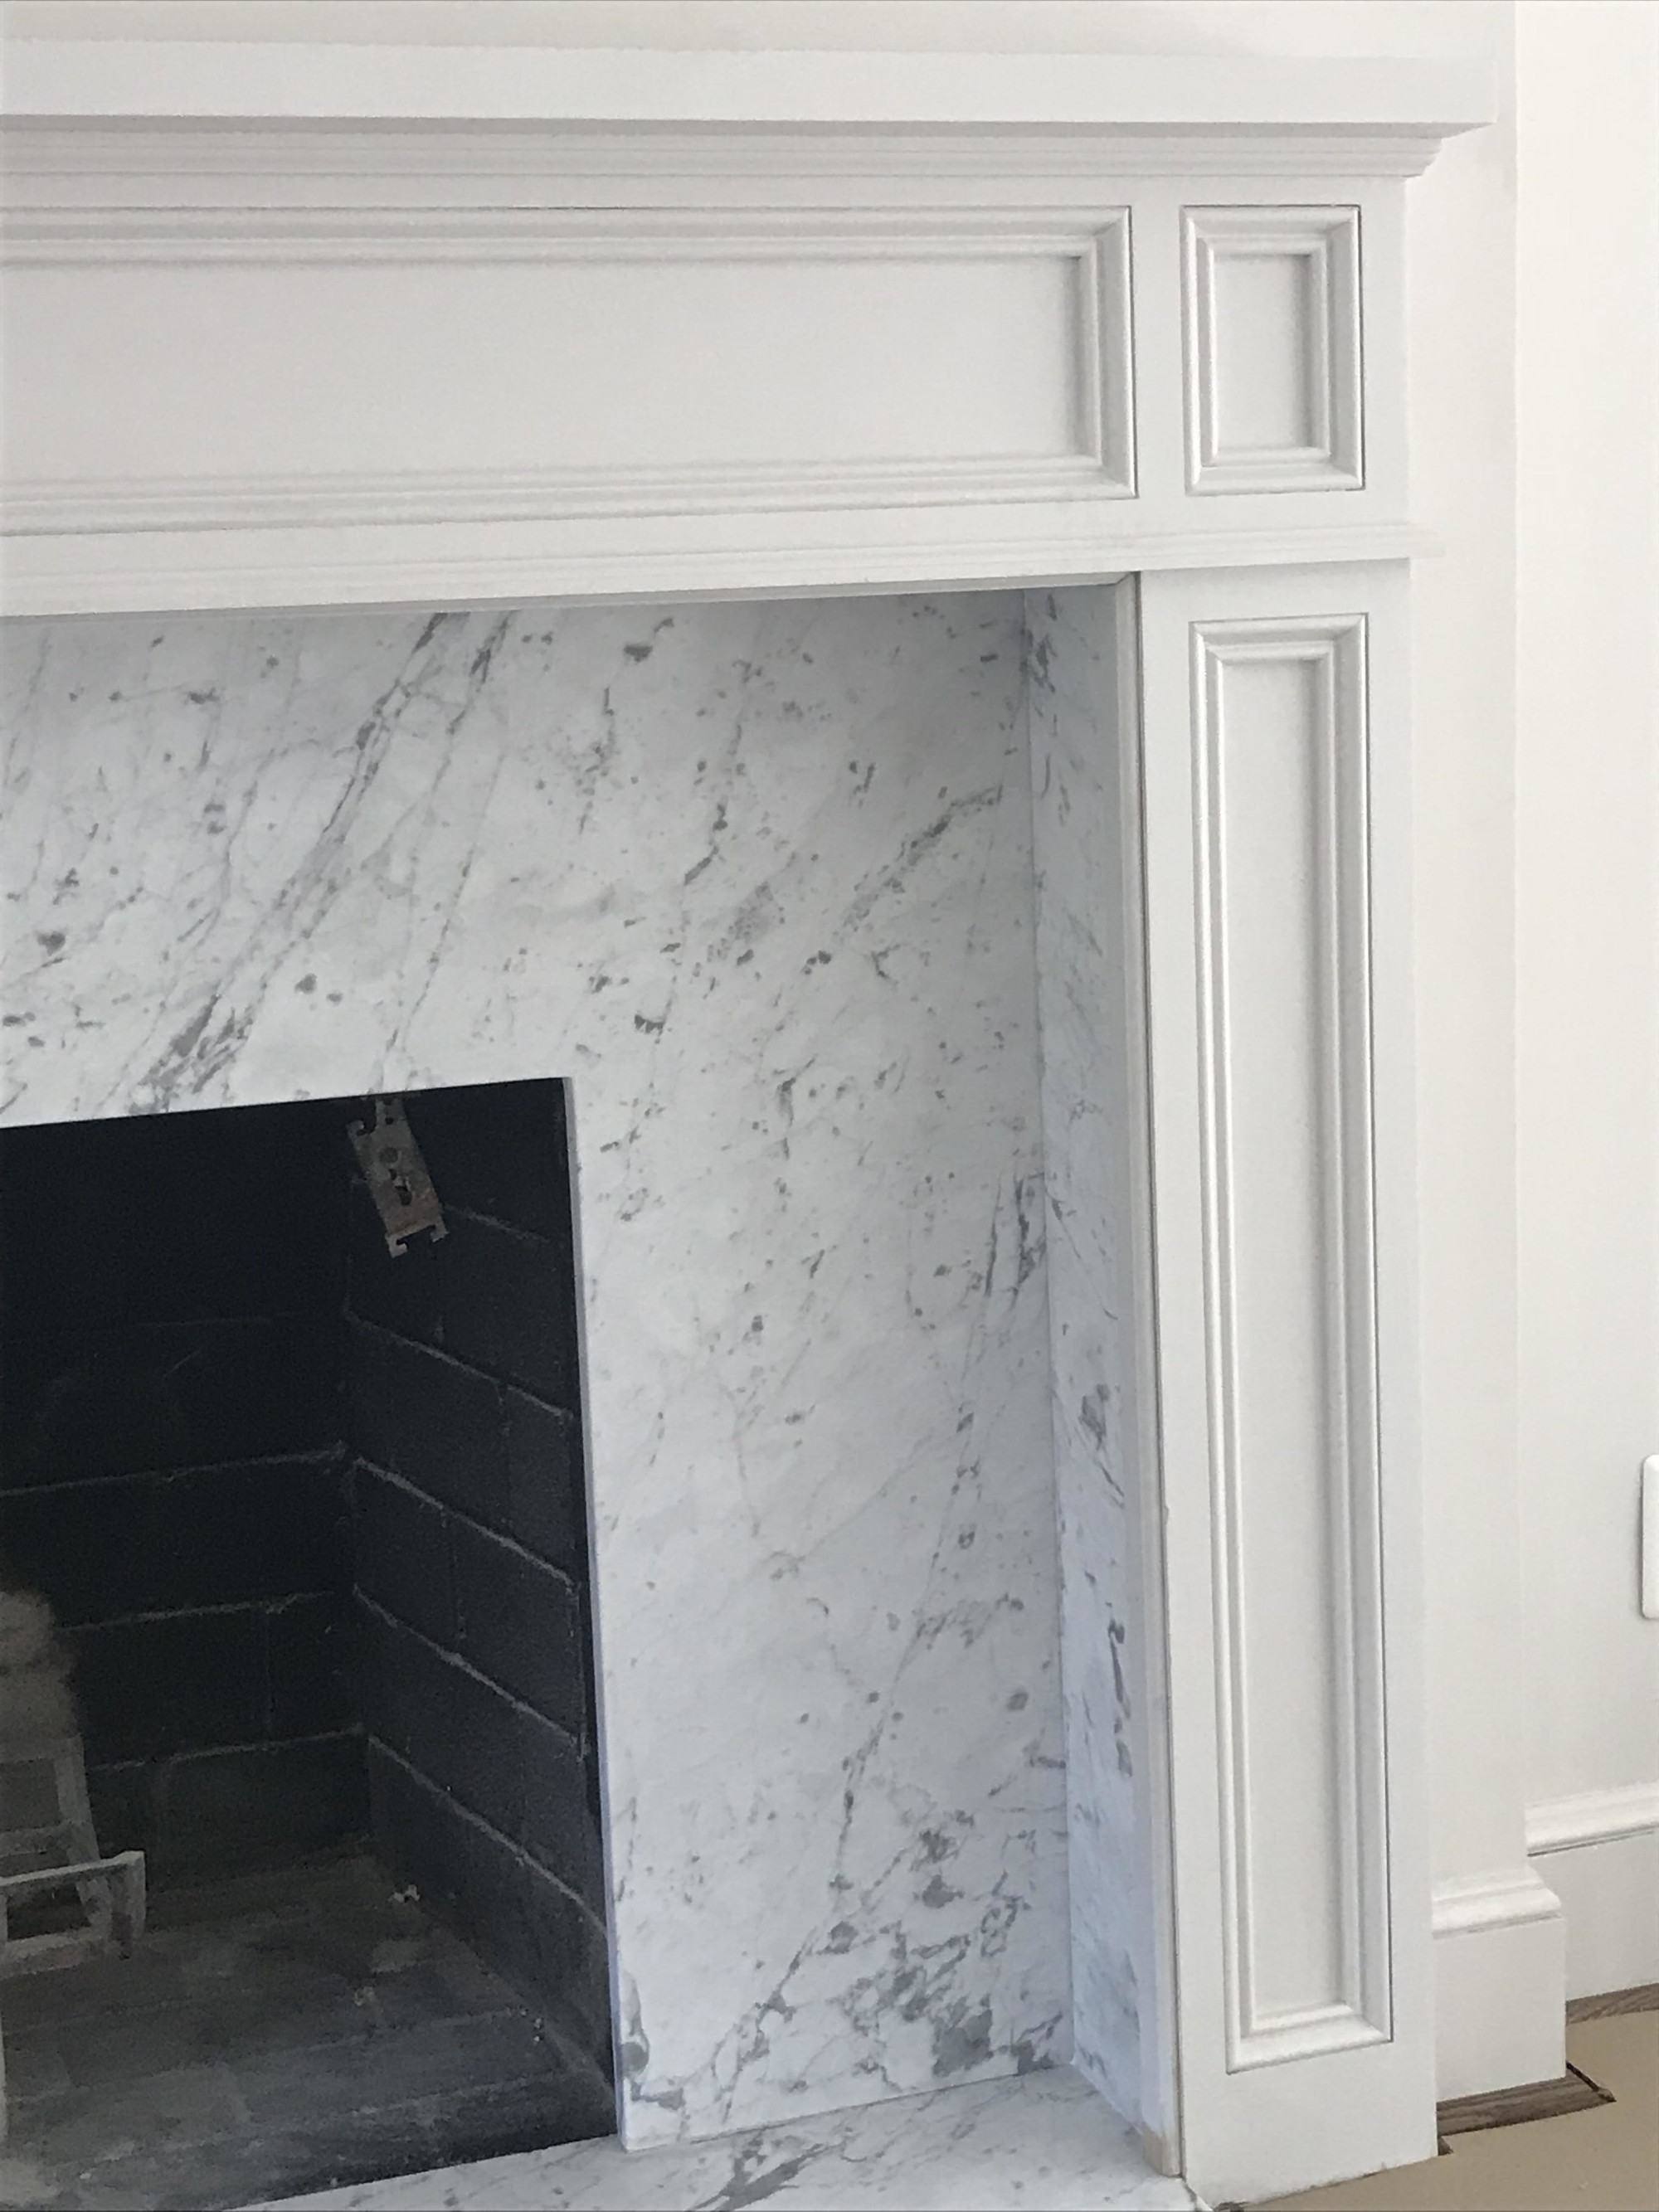 Finishing Touches on the Formal Fireplace